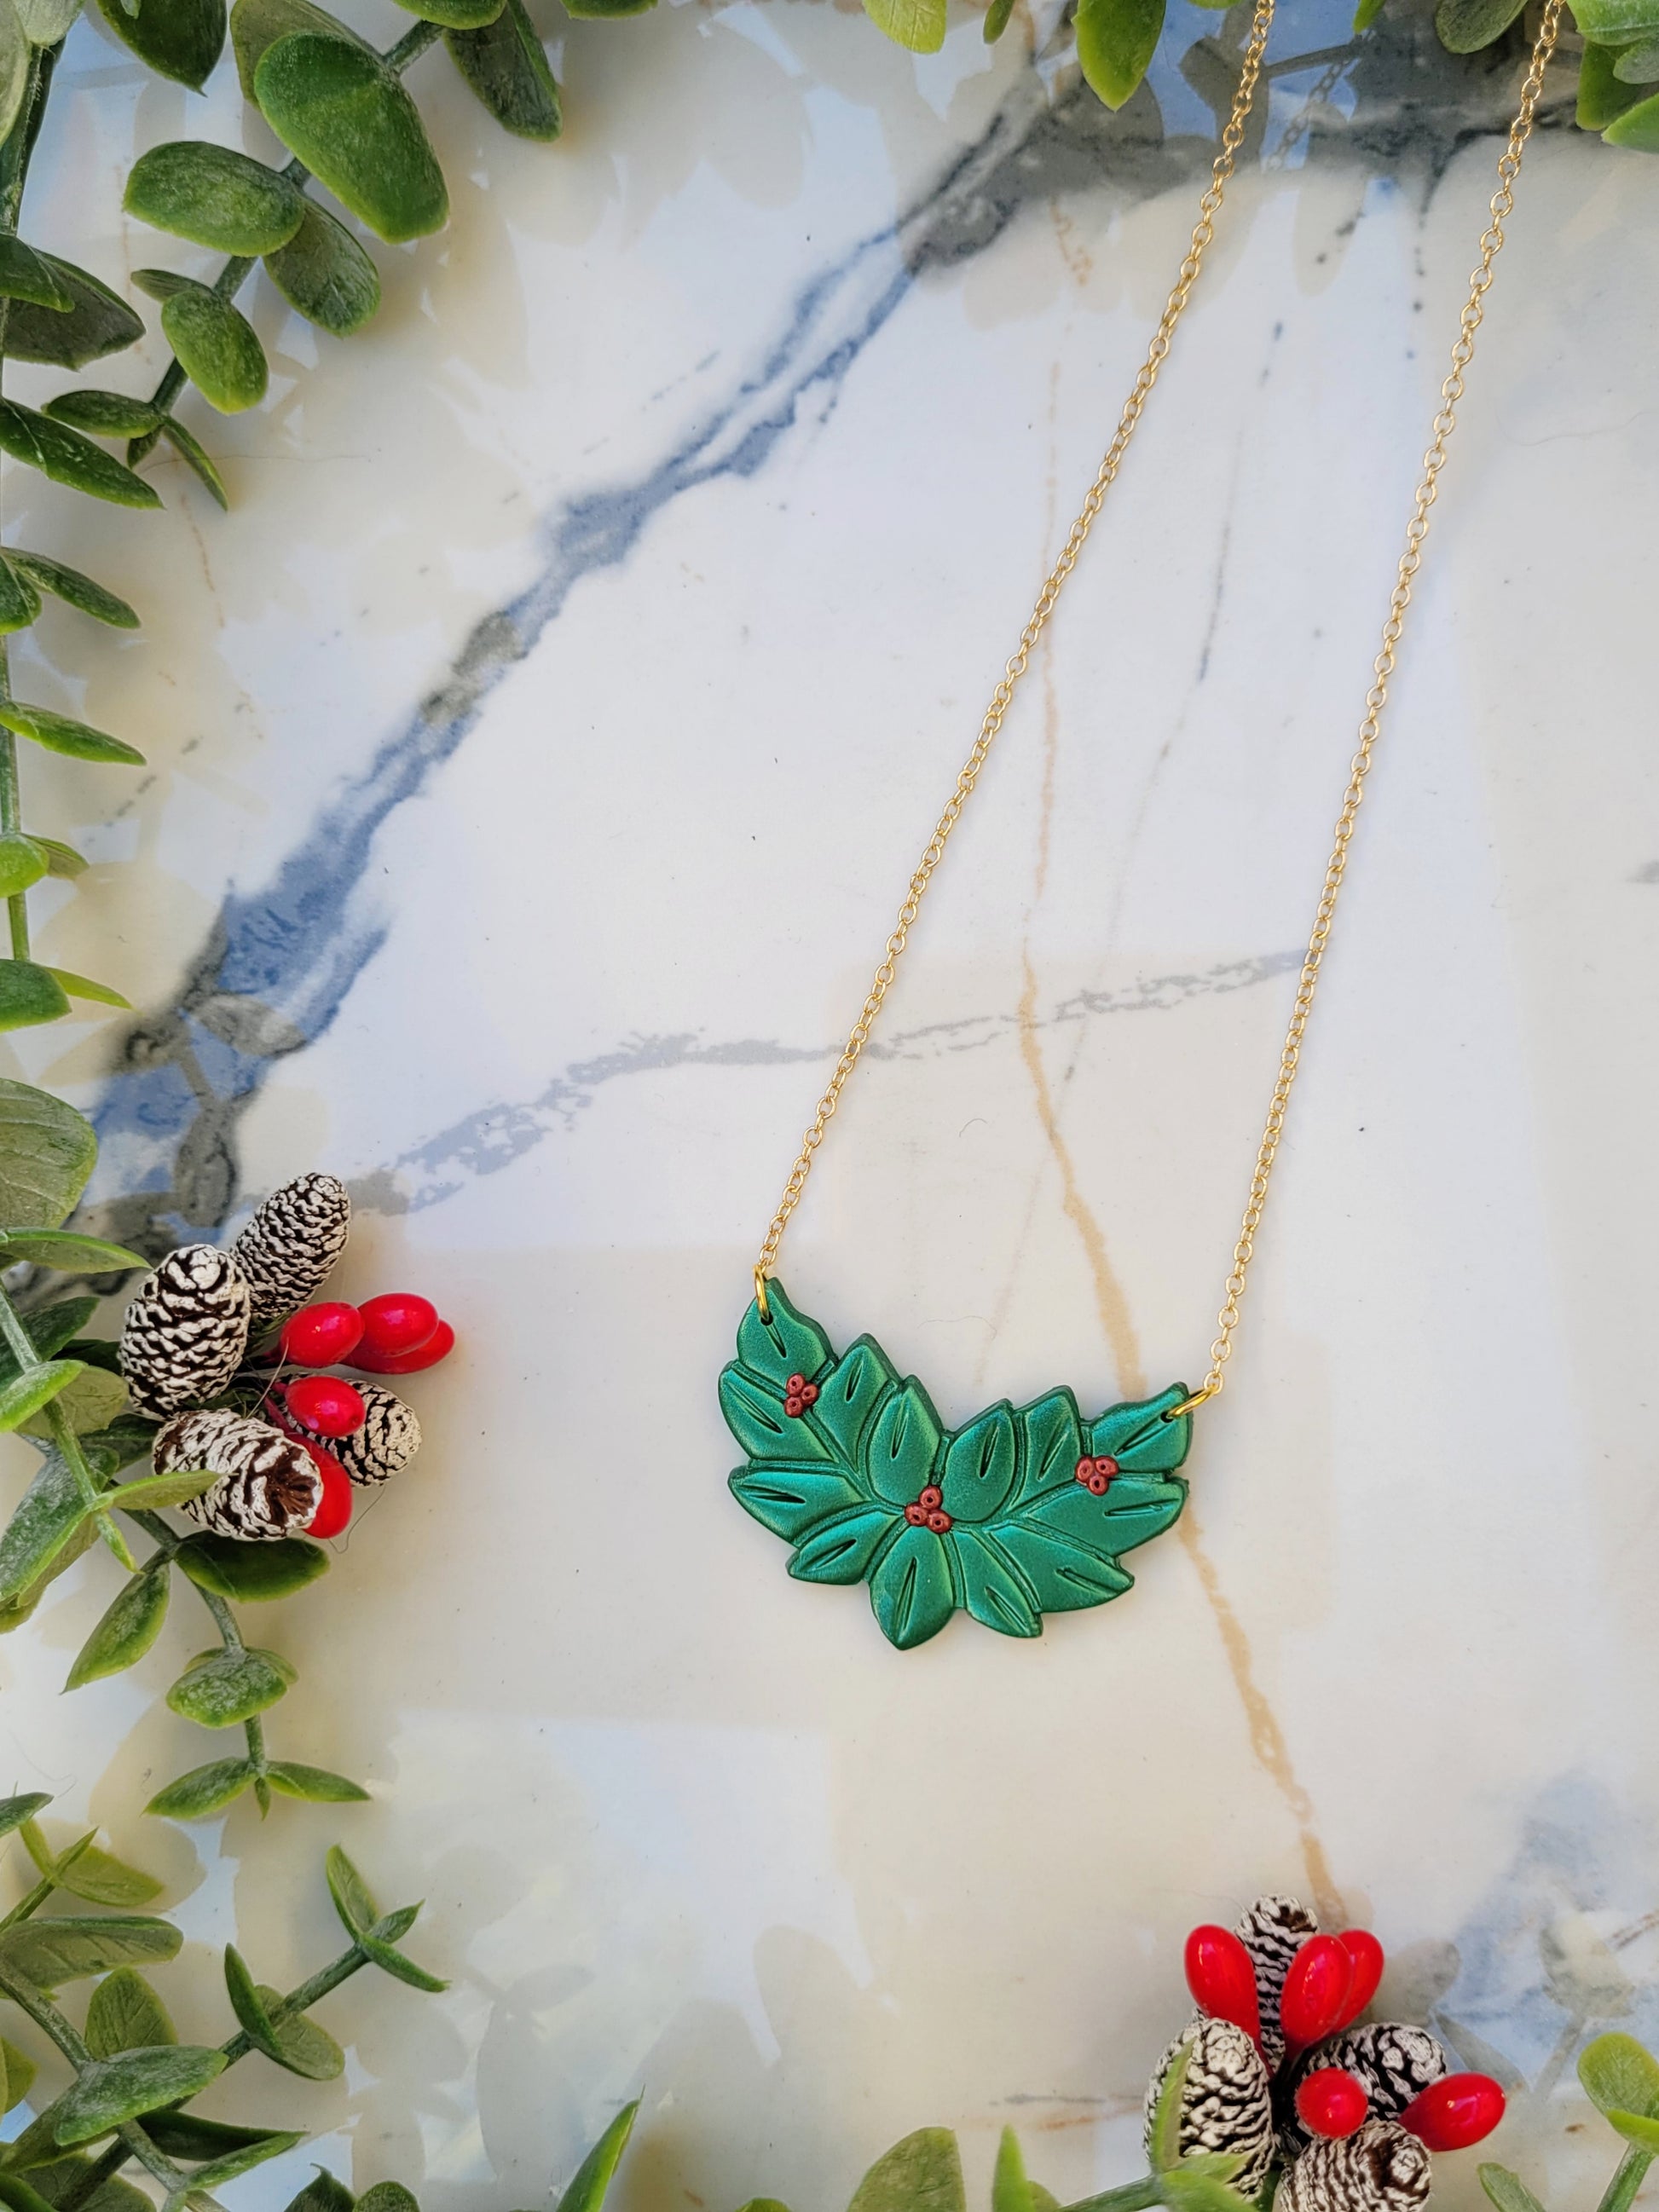 close up of Metallic green and red holly wreath necklace on a marble background surrounded by foliage.